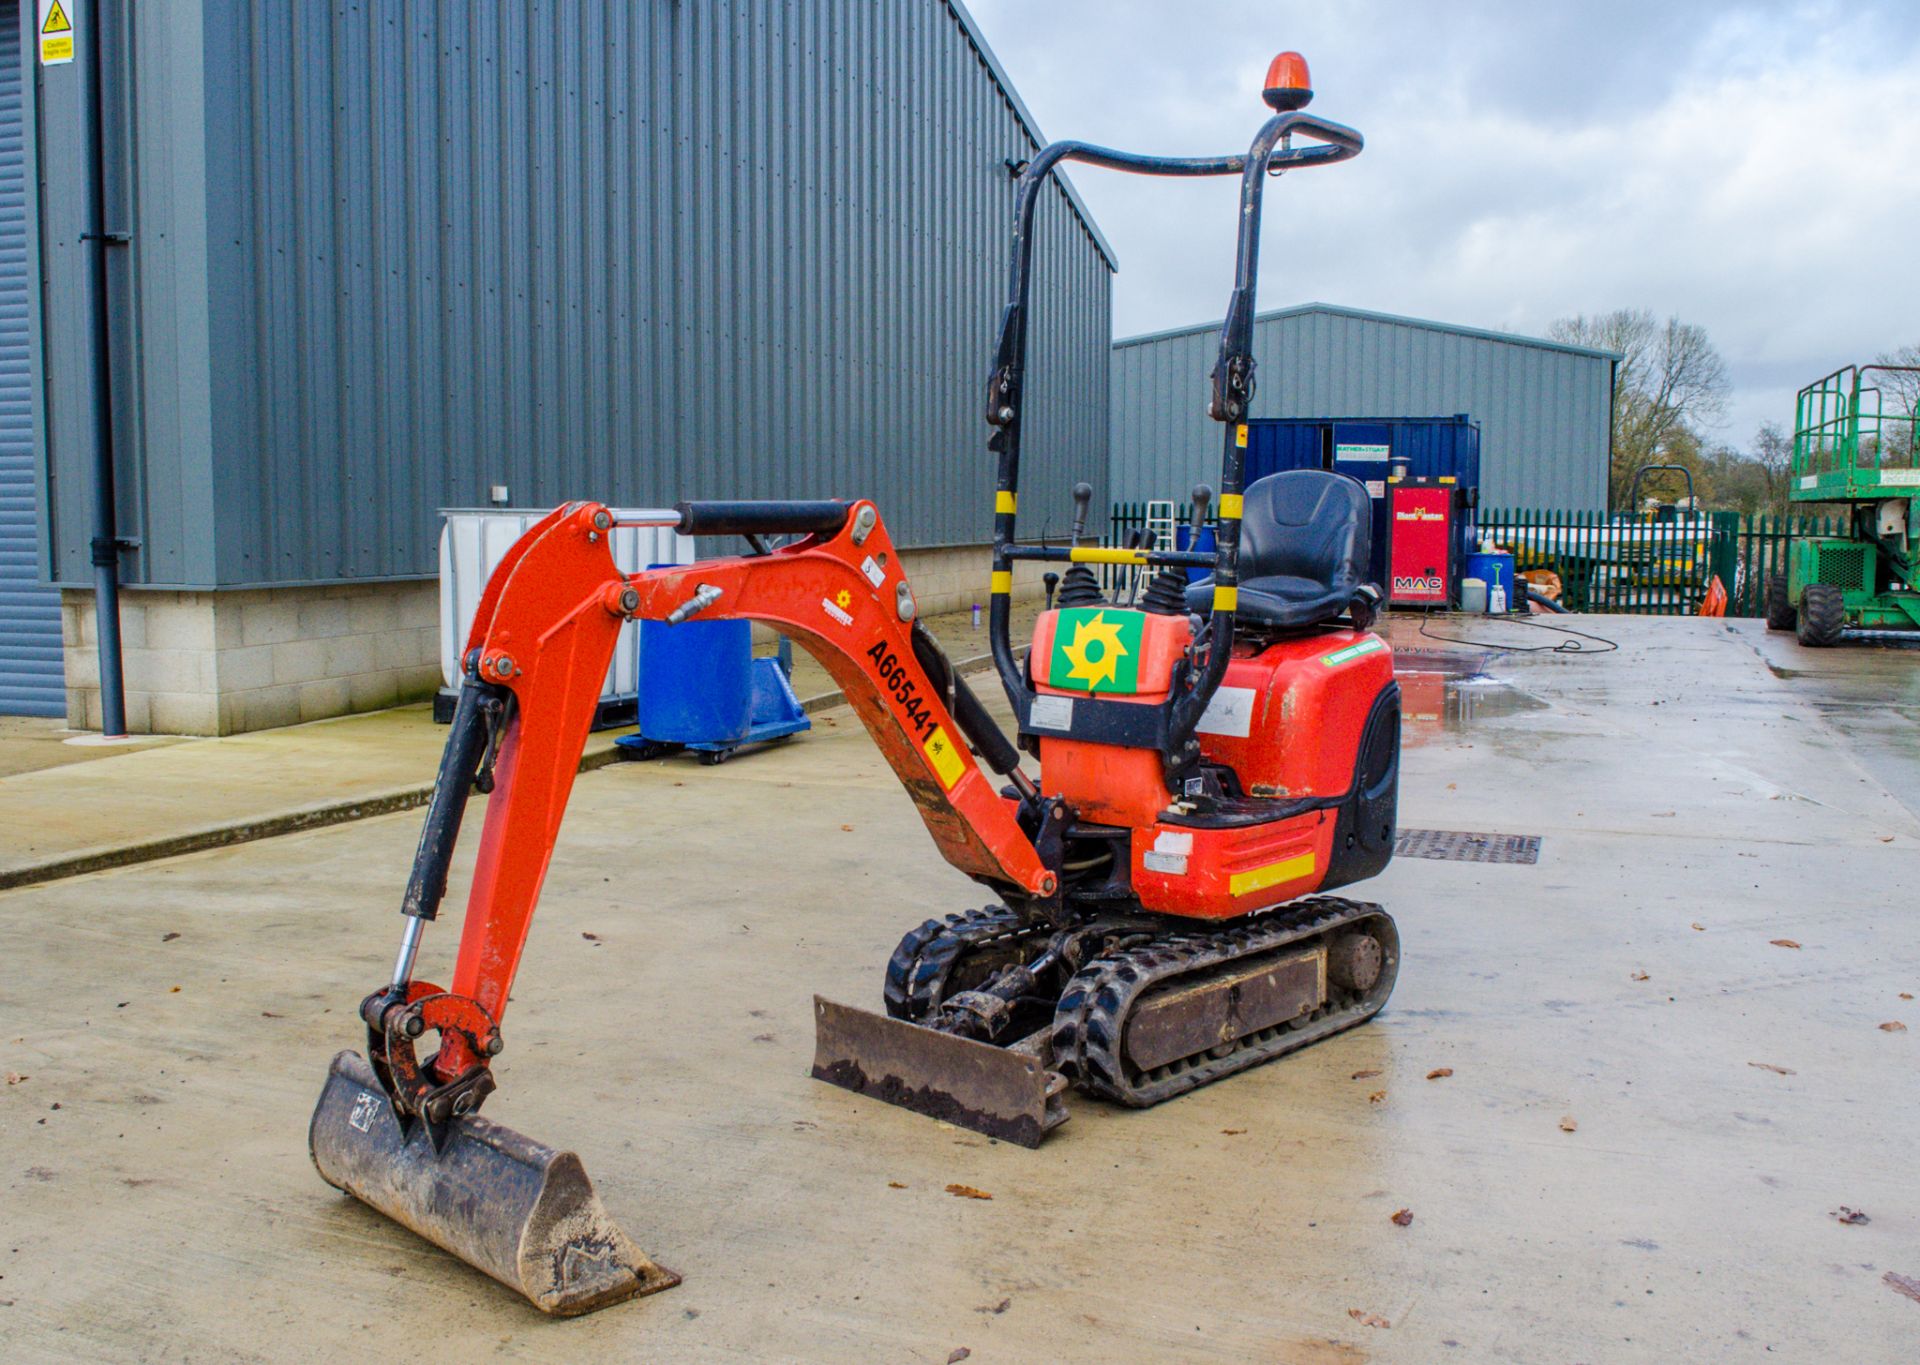 Kubota K008-3 0.8 tonne rubber tracked micro excavator Year: 2015 S/N: 26190 Recorded Hours: 1286